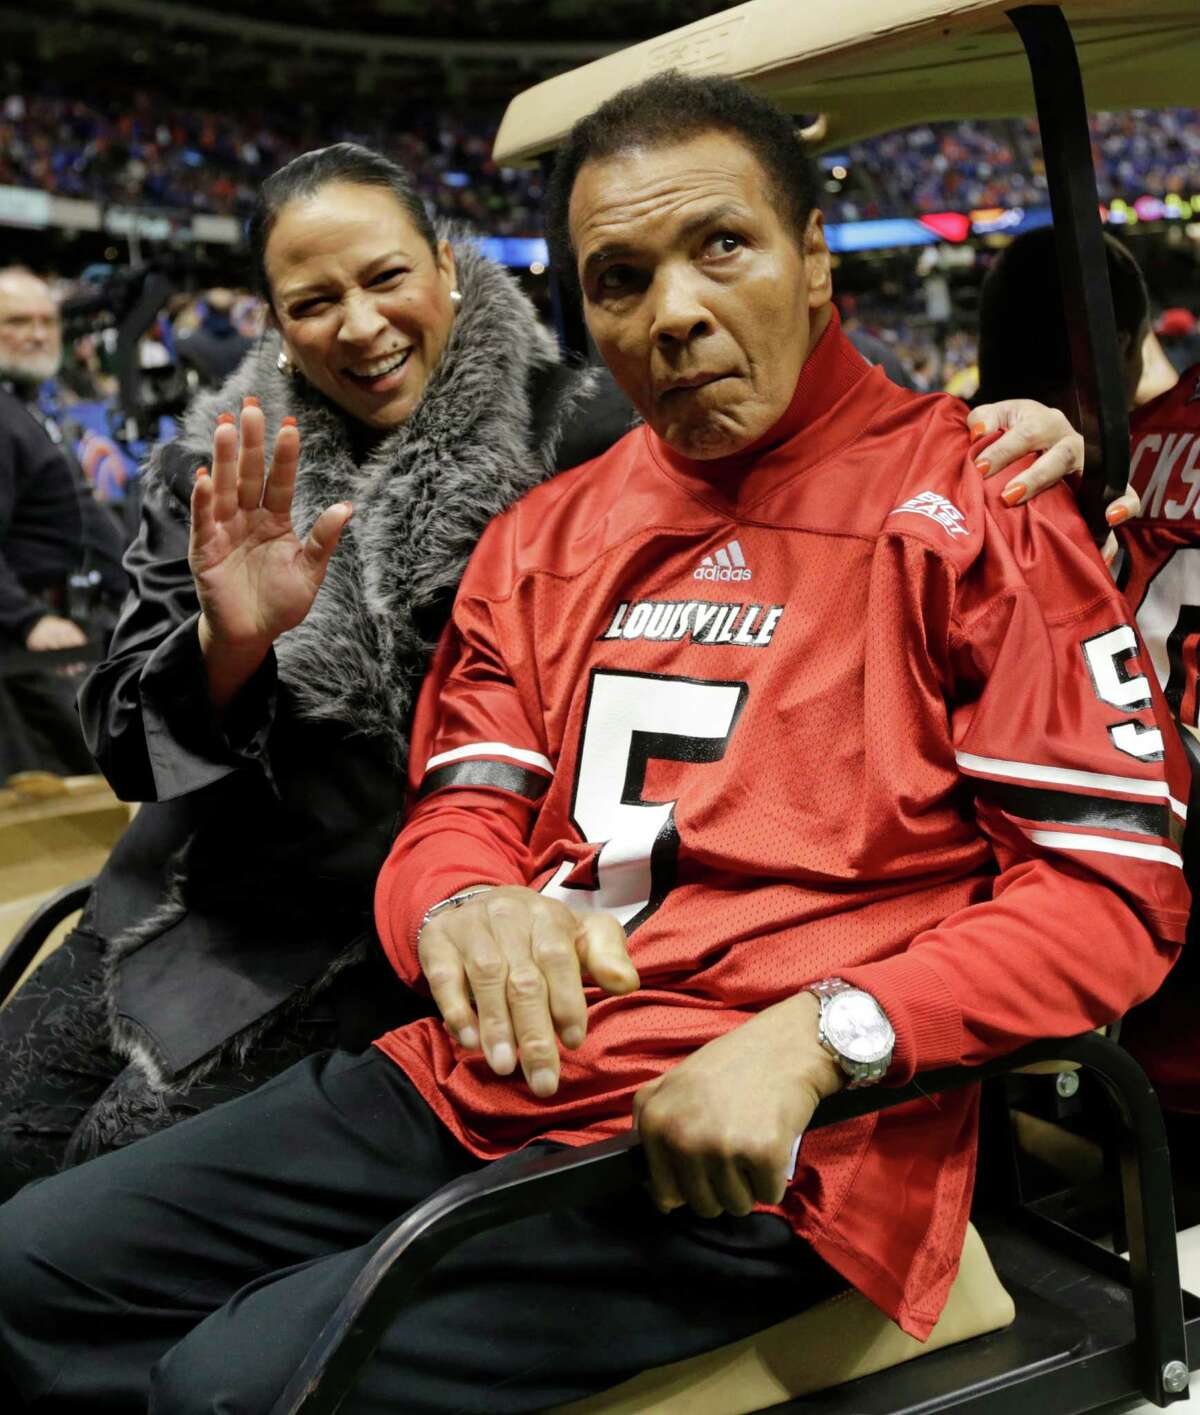 Former boxing legend Muhammad Ali arrives for the coin toss prior to the start of the Sugar Bowl NCAA college football game between Florida and Louisville on Wednesday, Jan. 2, 2013, in New Orleans. (AP Photo/Dave Martin)